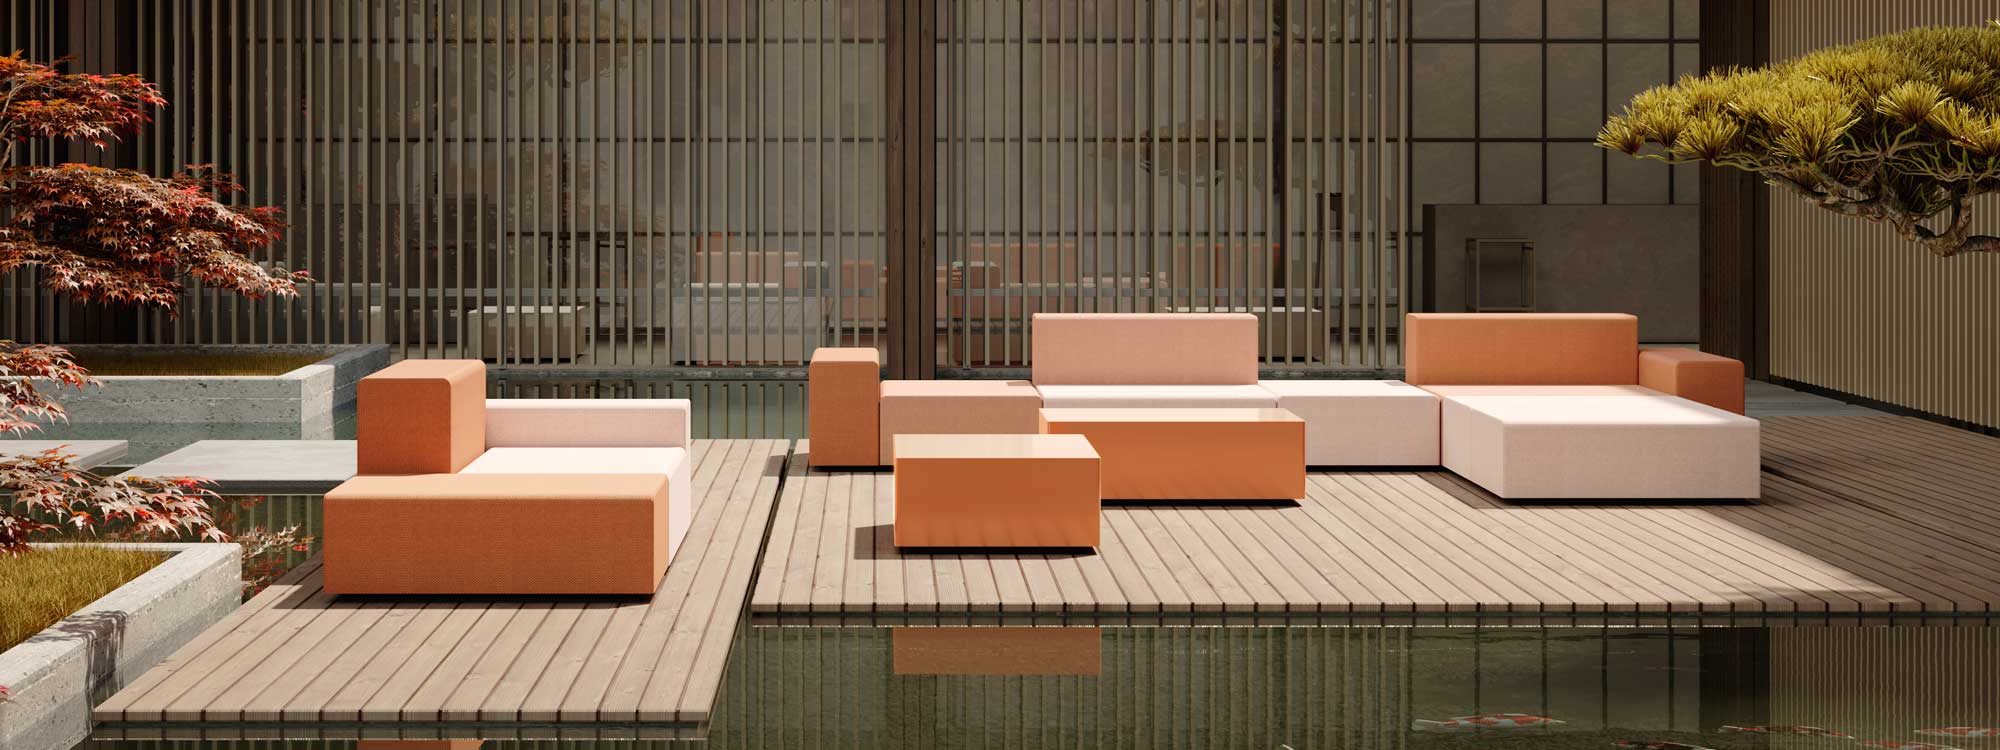 Image of Elements minimalist garden sofa on decking hovering just above the water within a Japanese garden